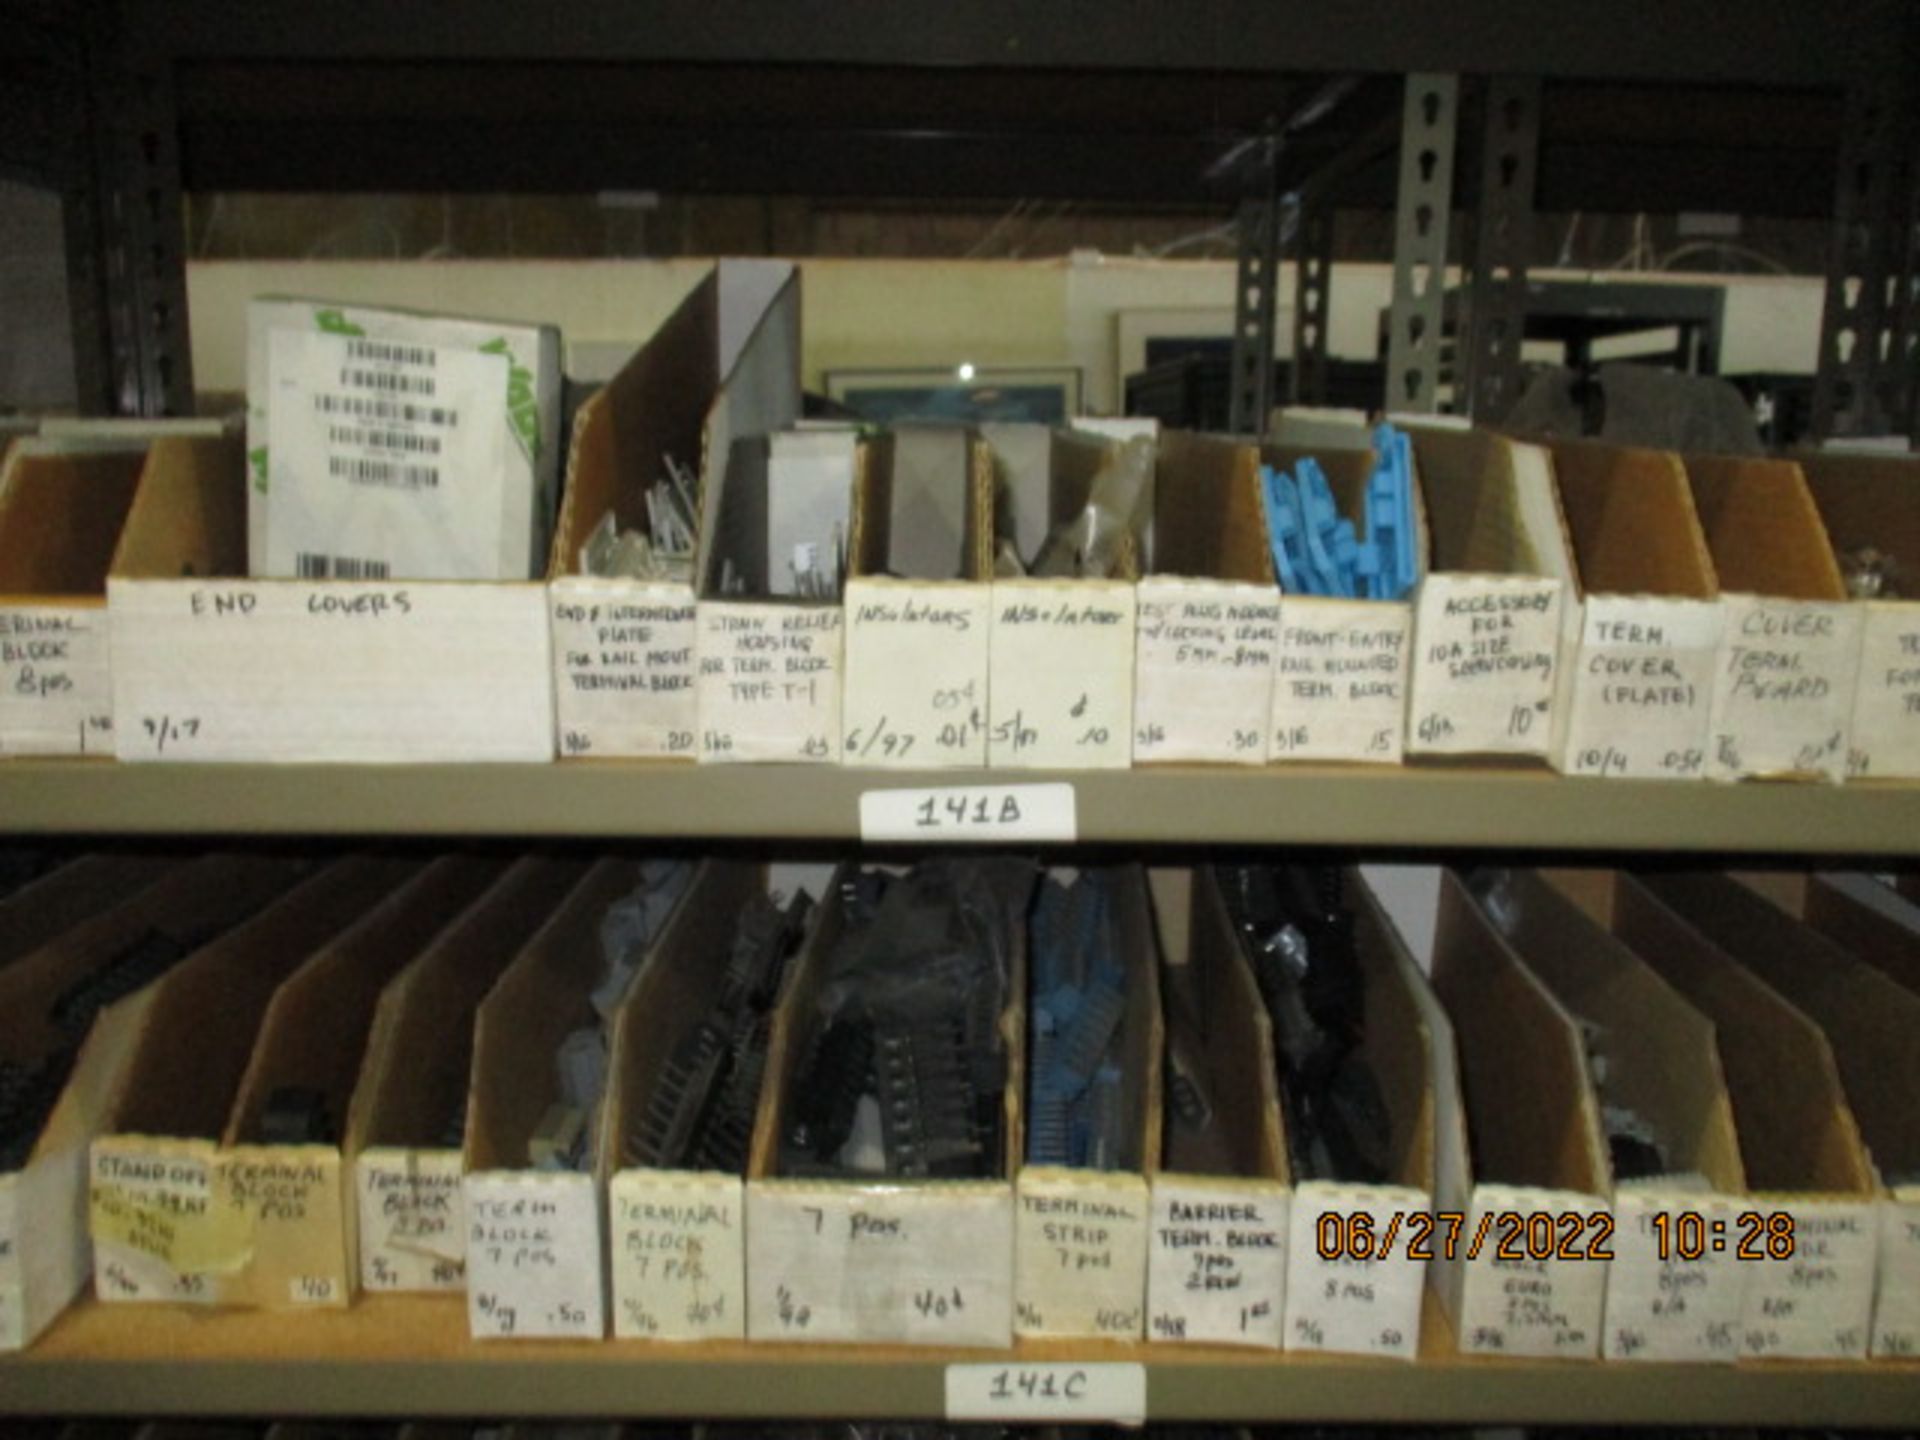 CONTENTS OF SHELVING UNIT CONSISTING OF INSULATORS, COVERS, 2-10 PIN CONNECTORS - Image 2 of 5